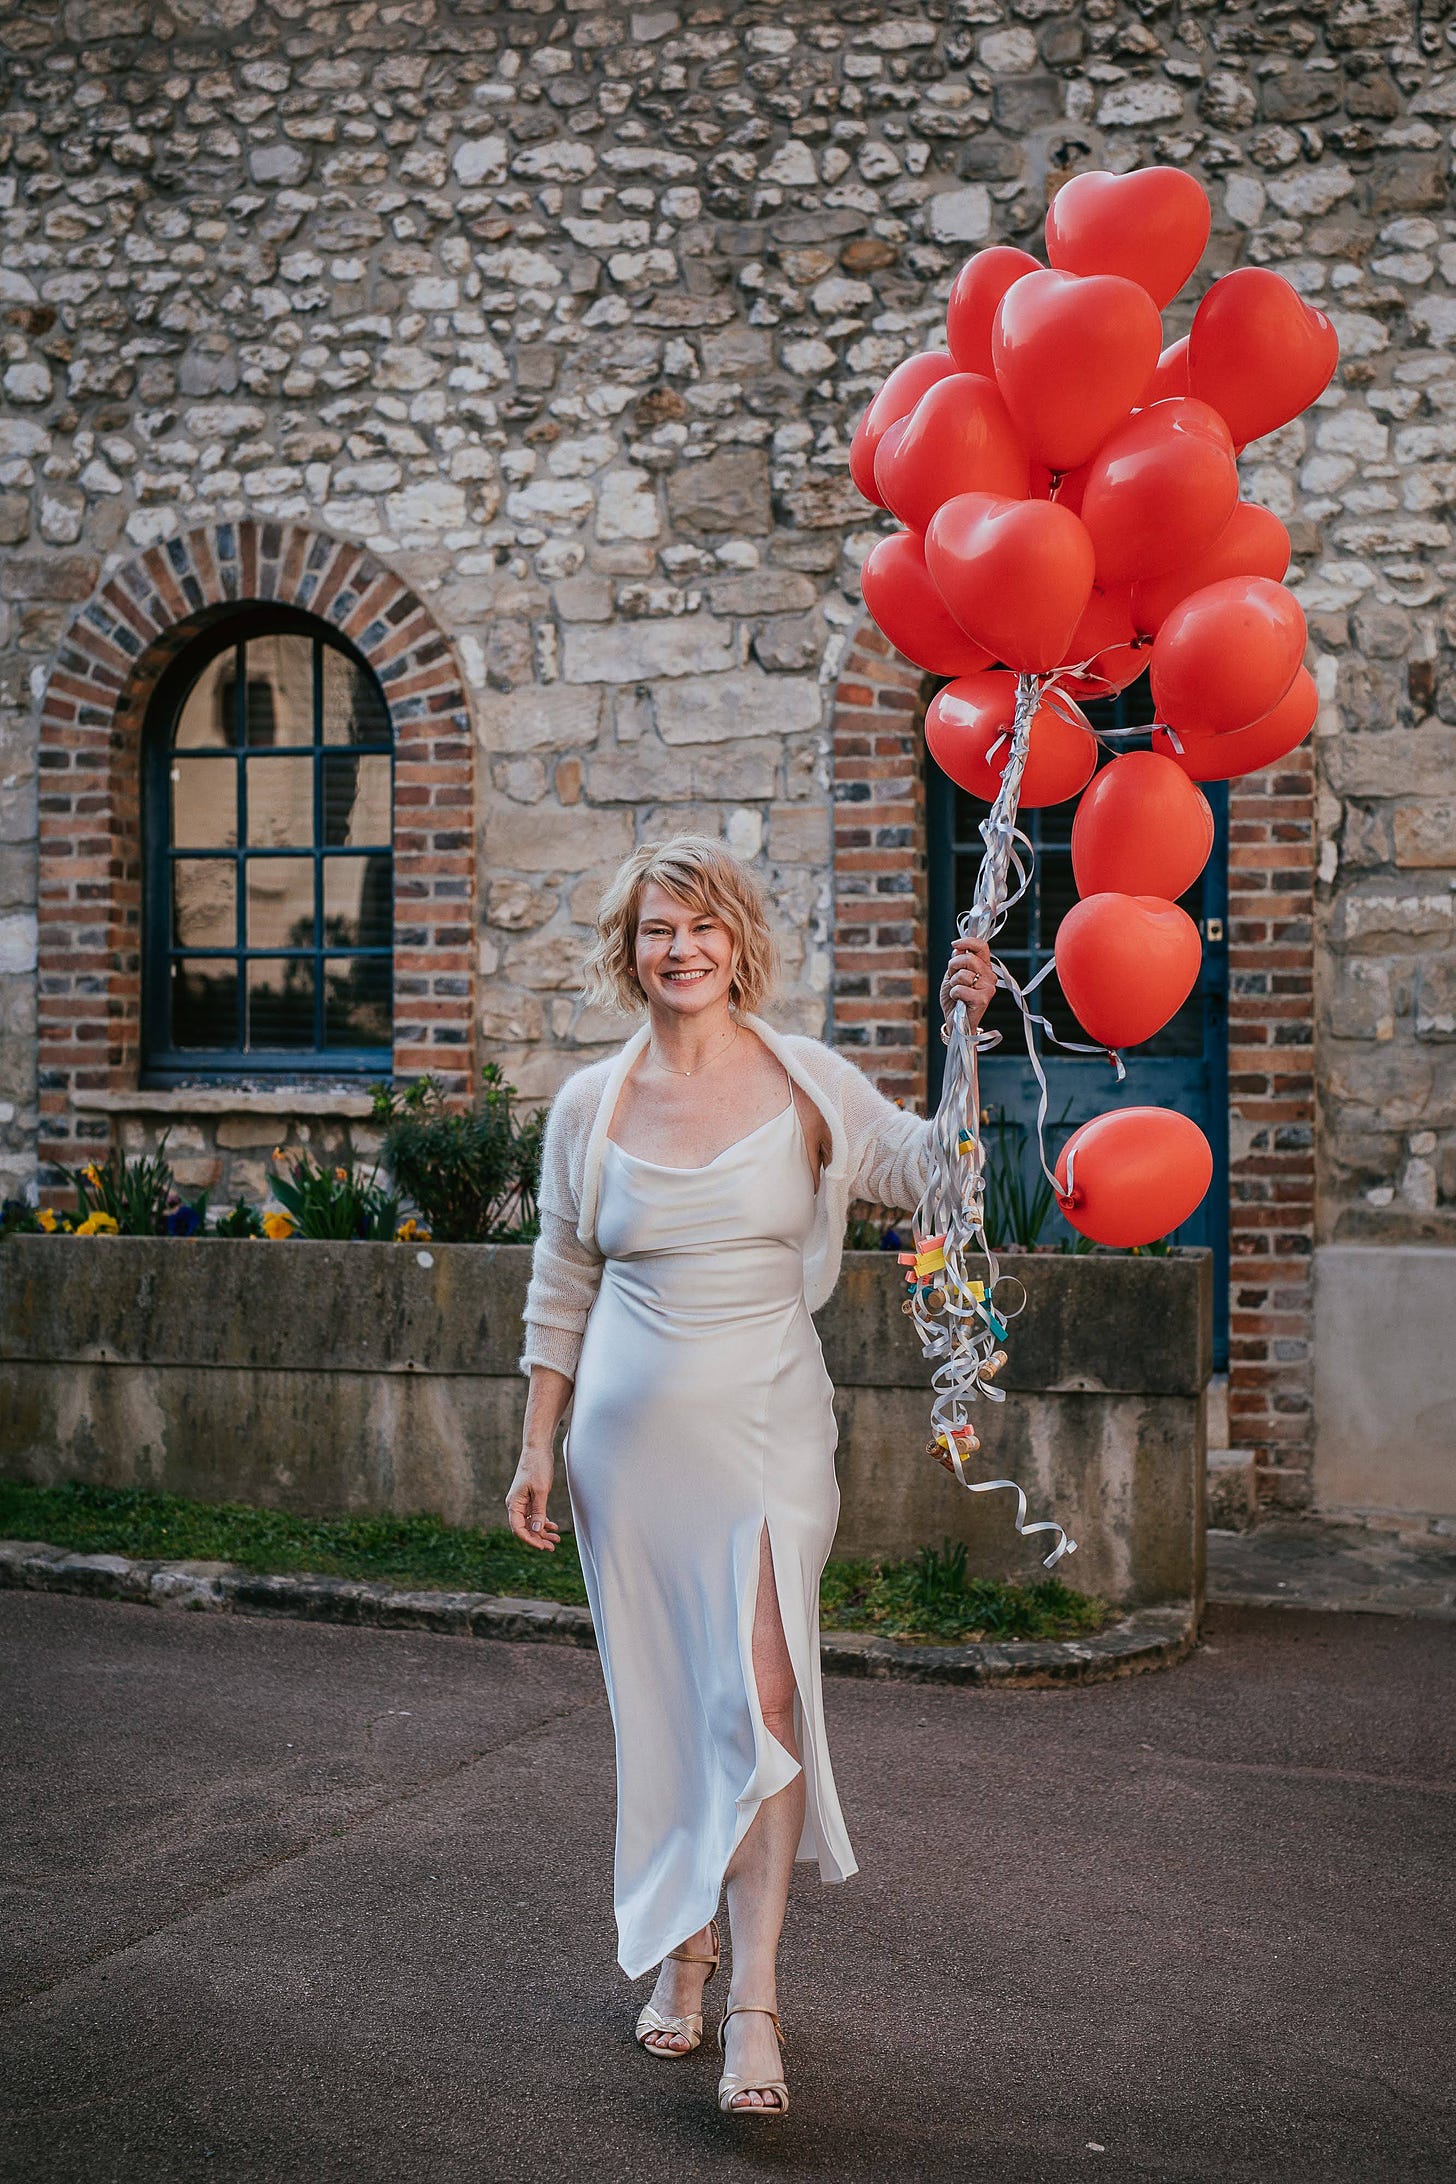 A bride poses with a balloon bouquet at her wedding